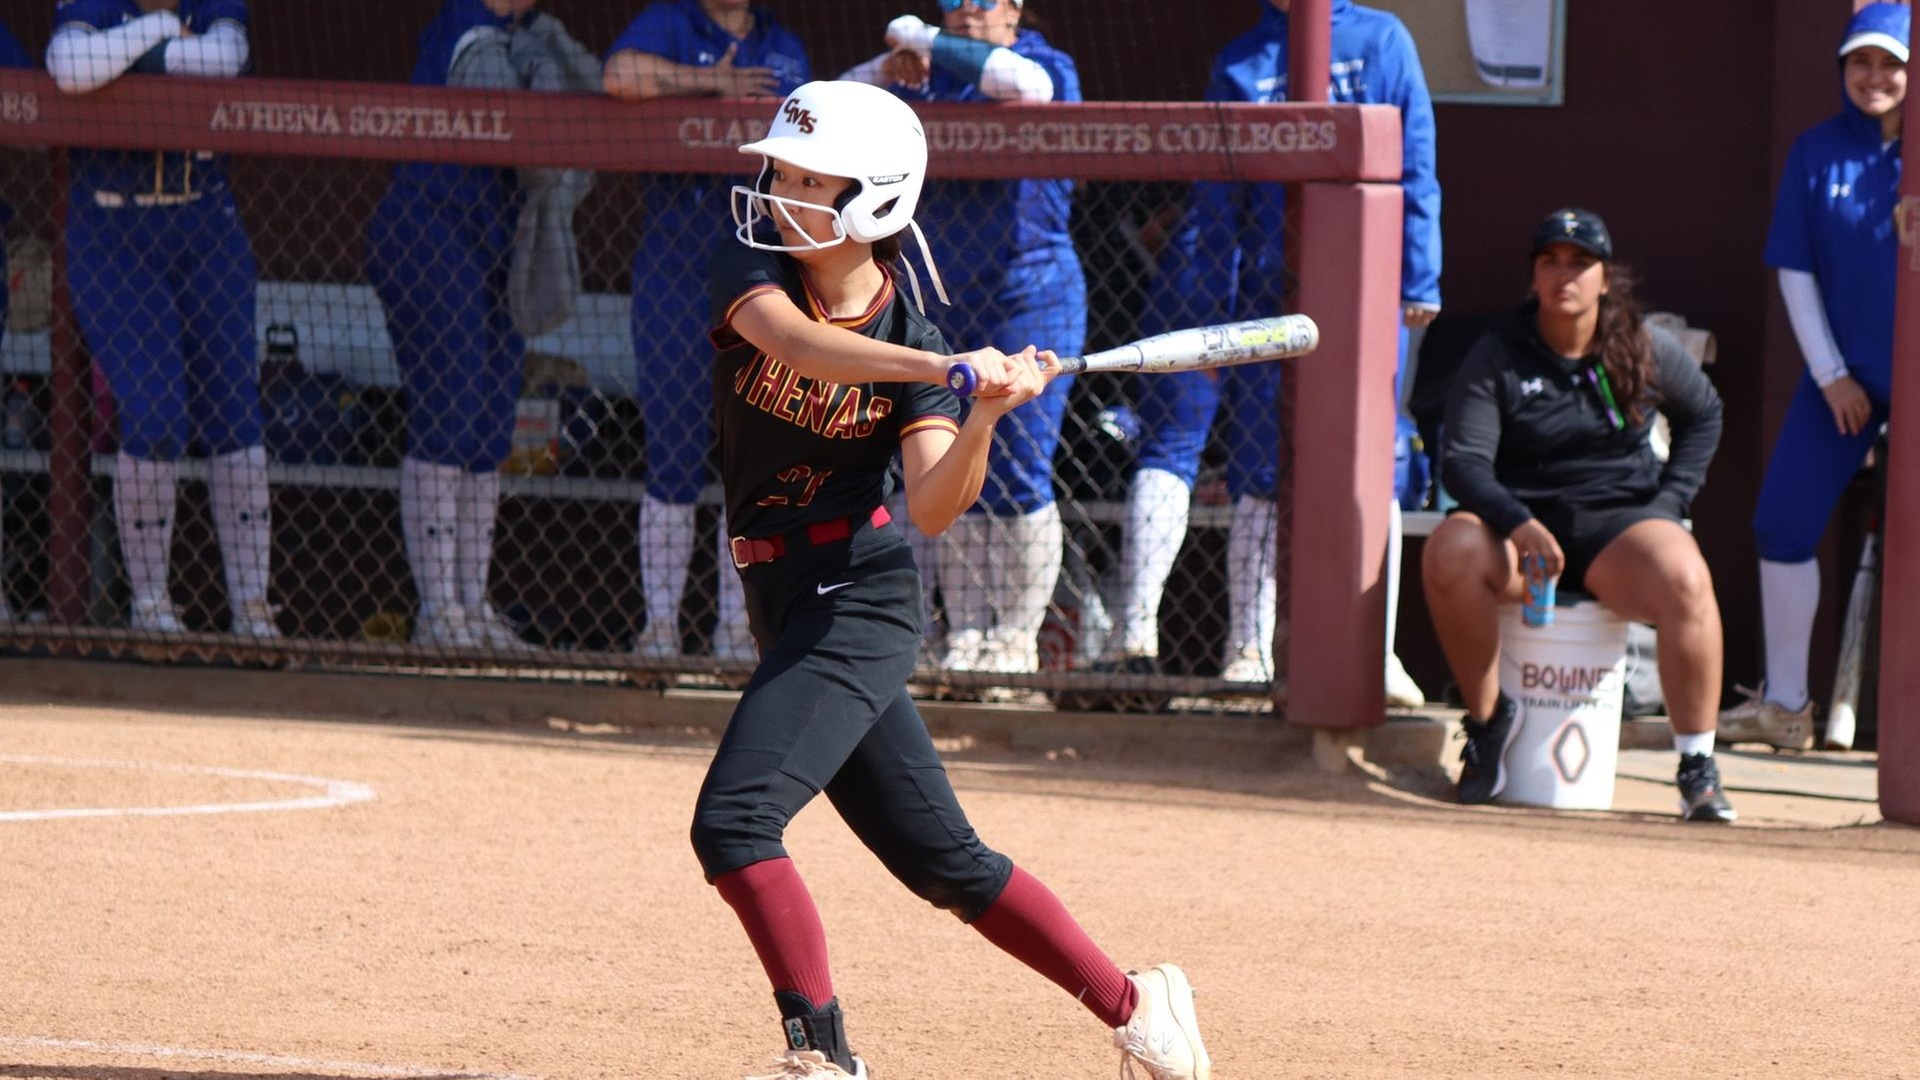 Emma Suh was 3-for-3 with three RBI in the second game